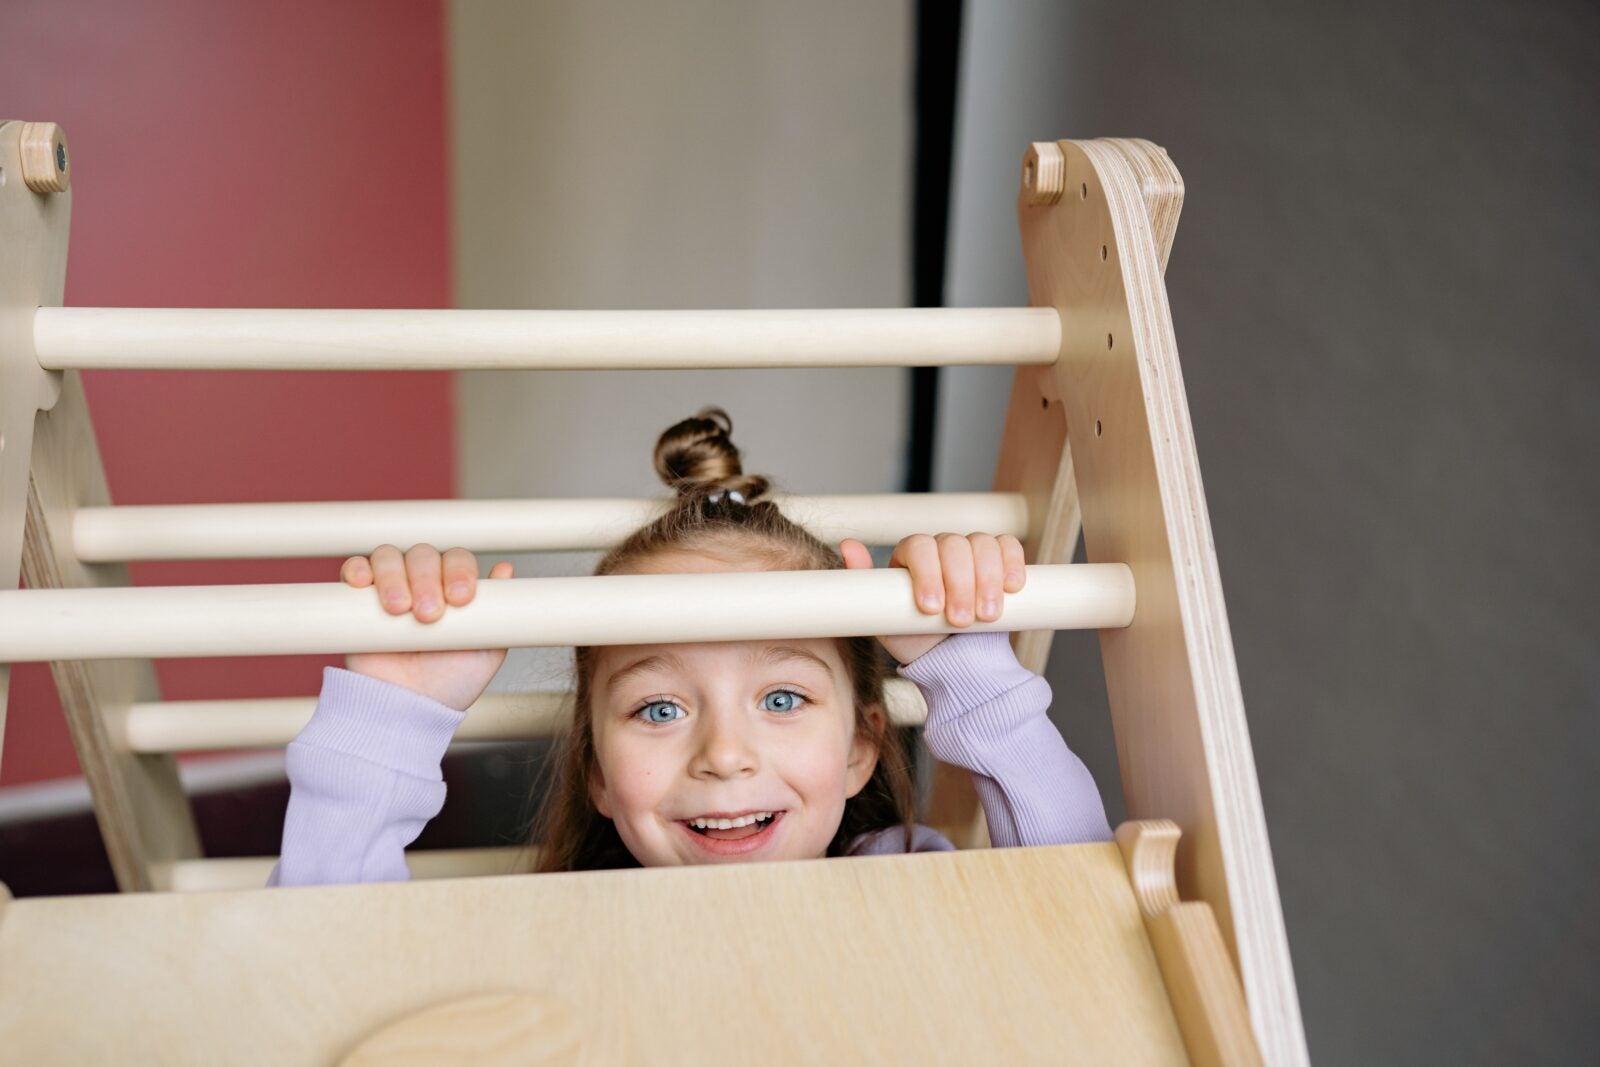 A little girl with blue eyes is smiling while hiding slightly under a wooden construct